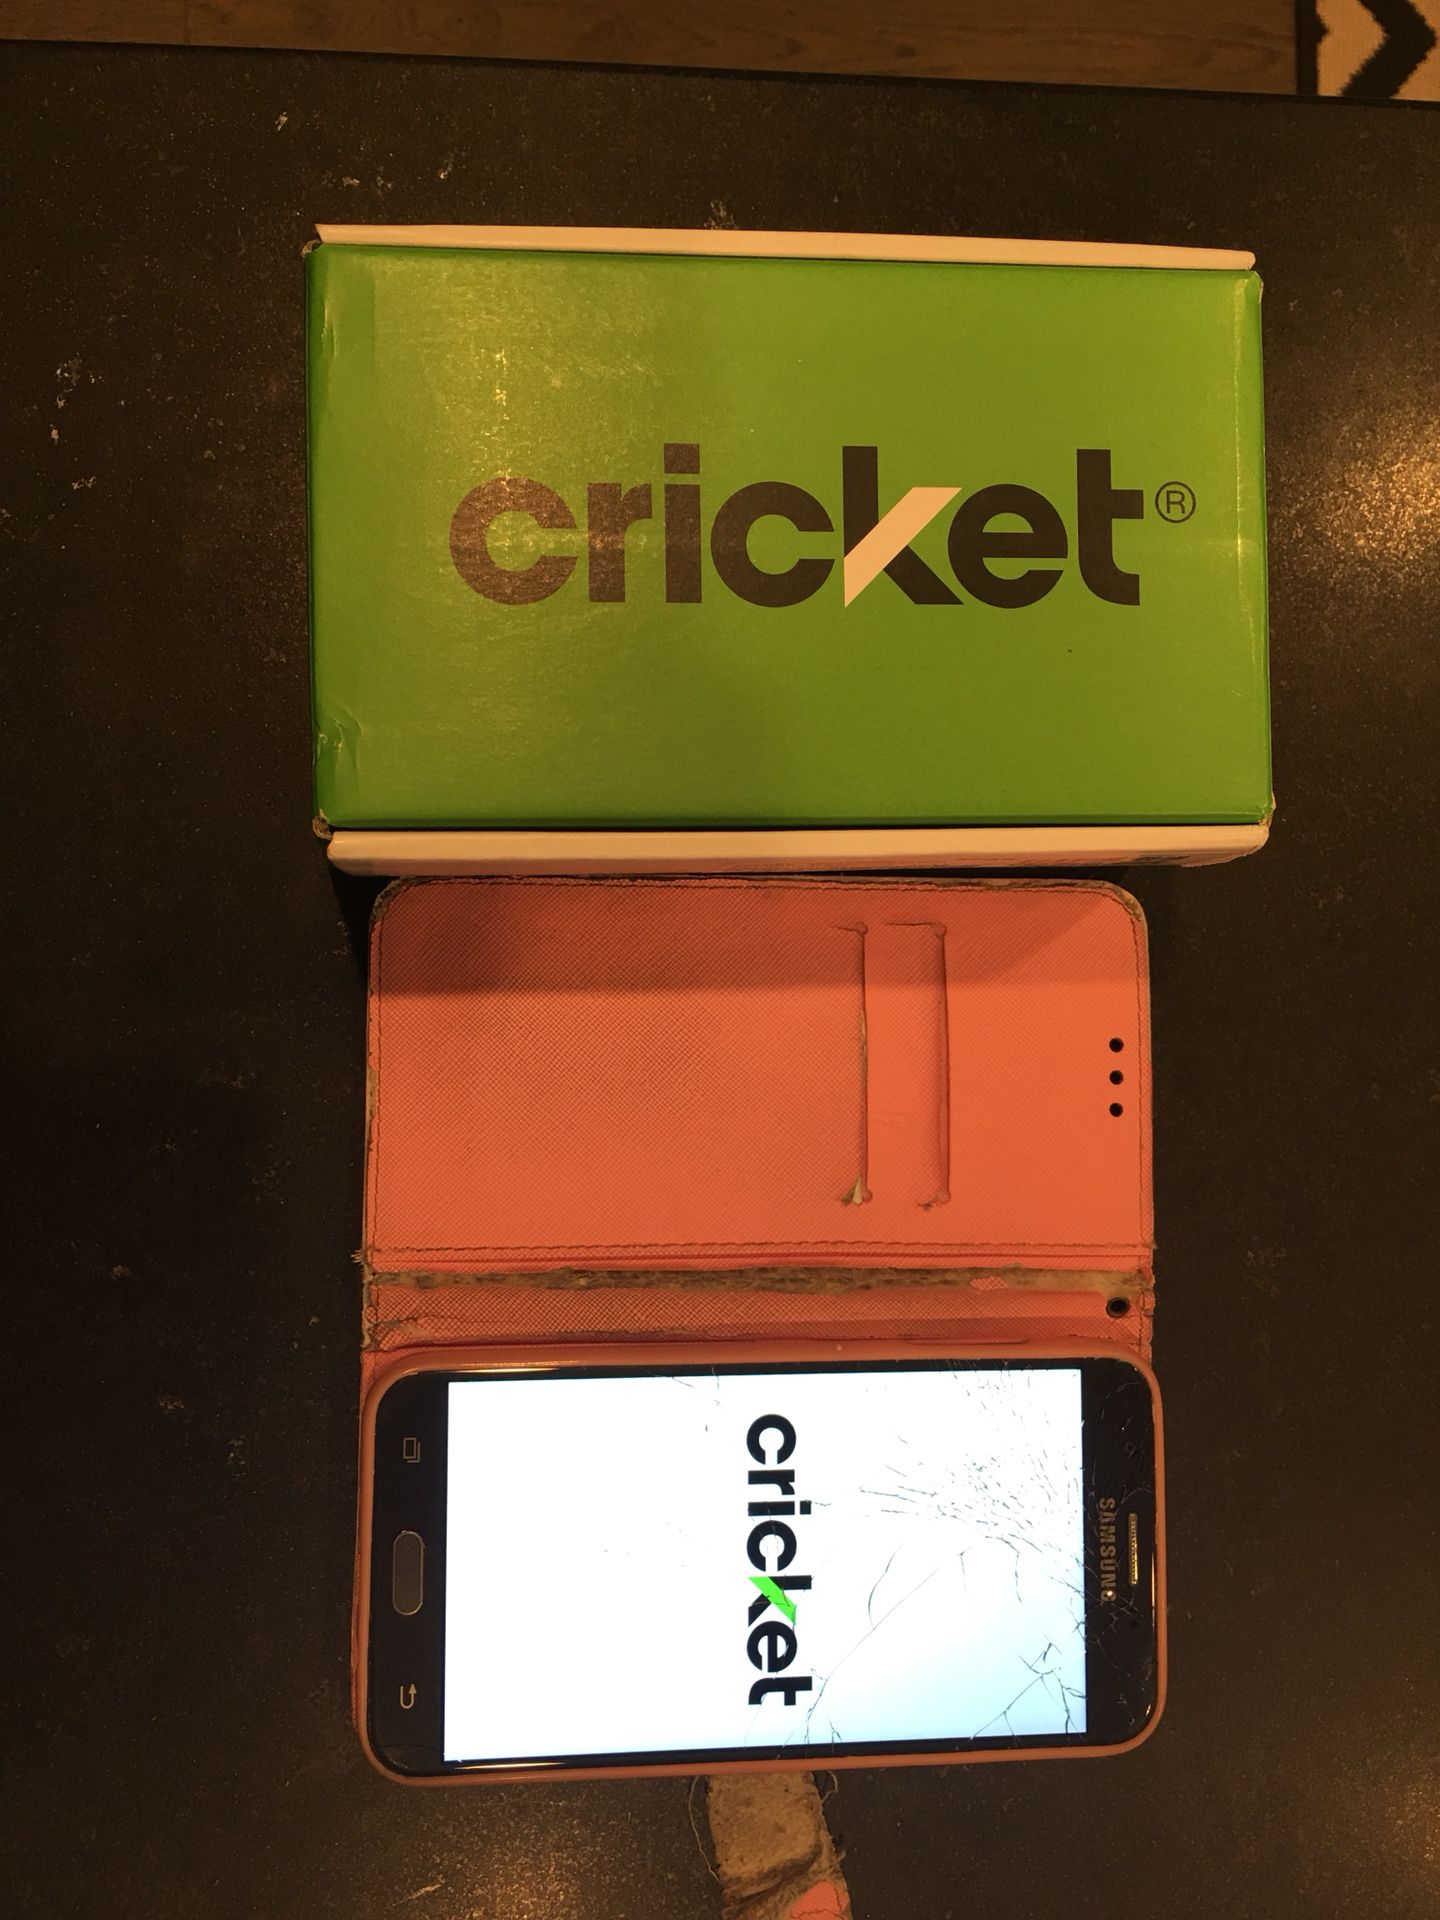 Cricket cell phone